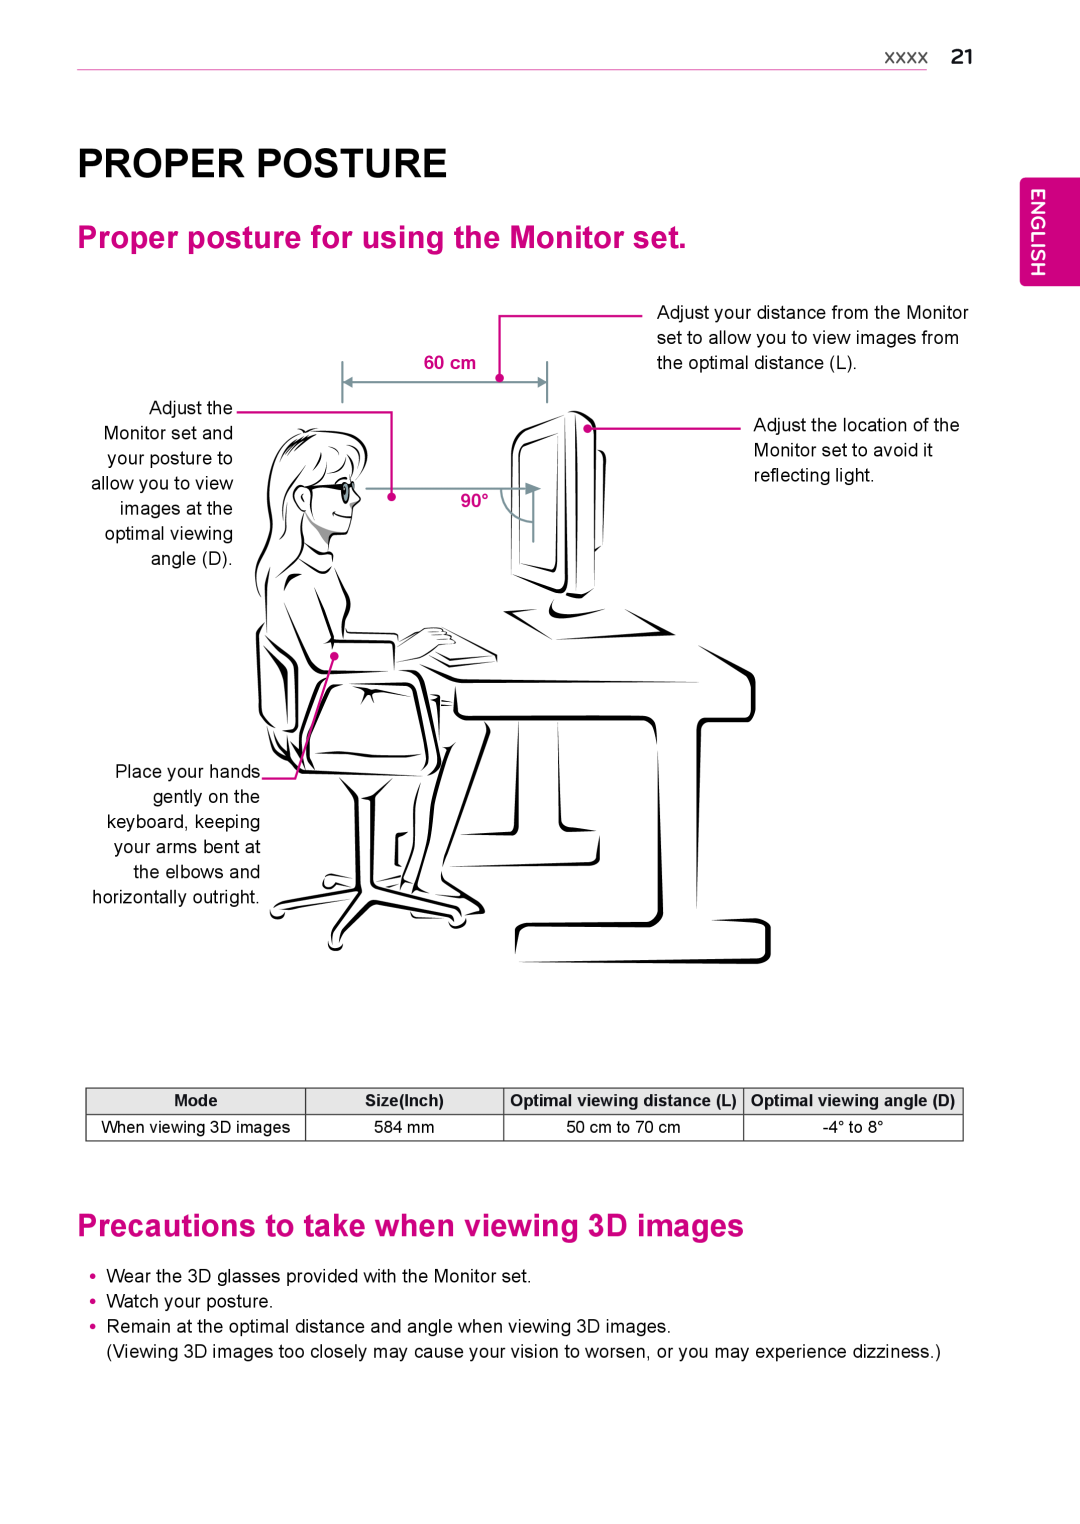 LG Electronics D2342P Proper Posture, Proper posture for using the Monitor set, Precautions to take when viewing 3D images 